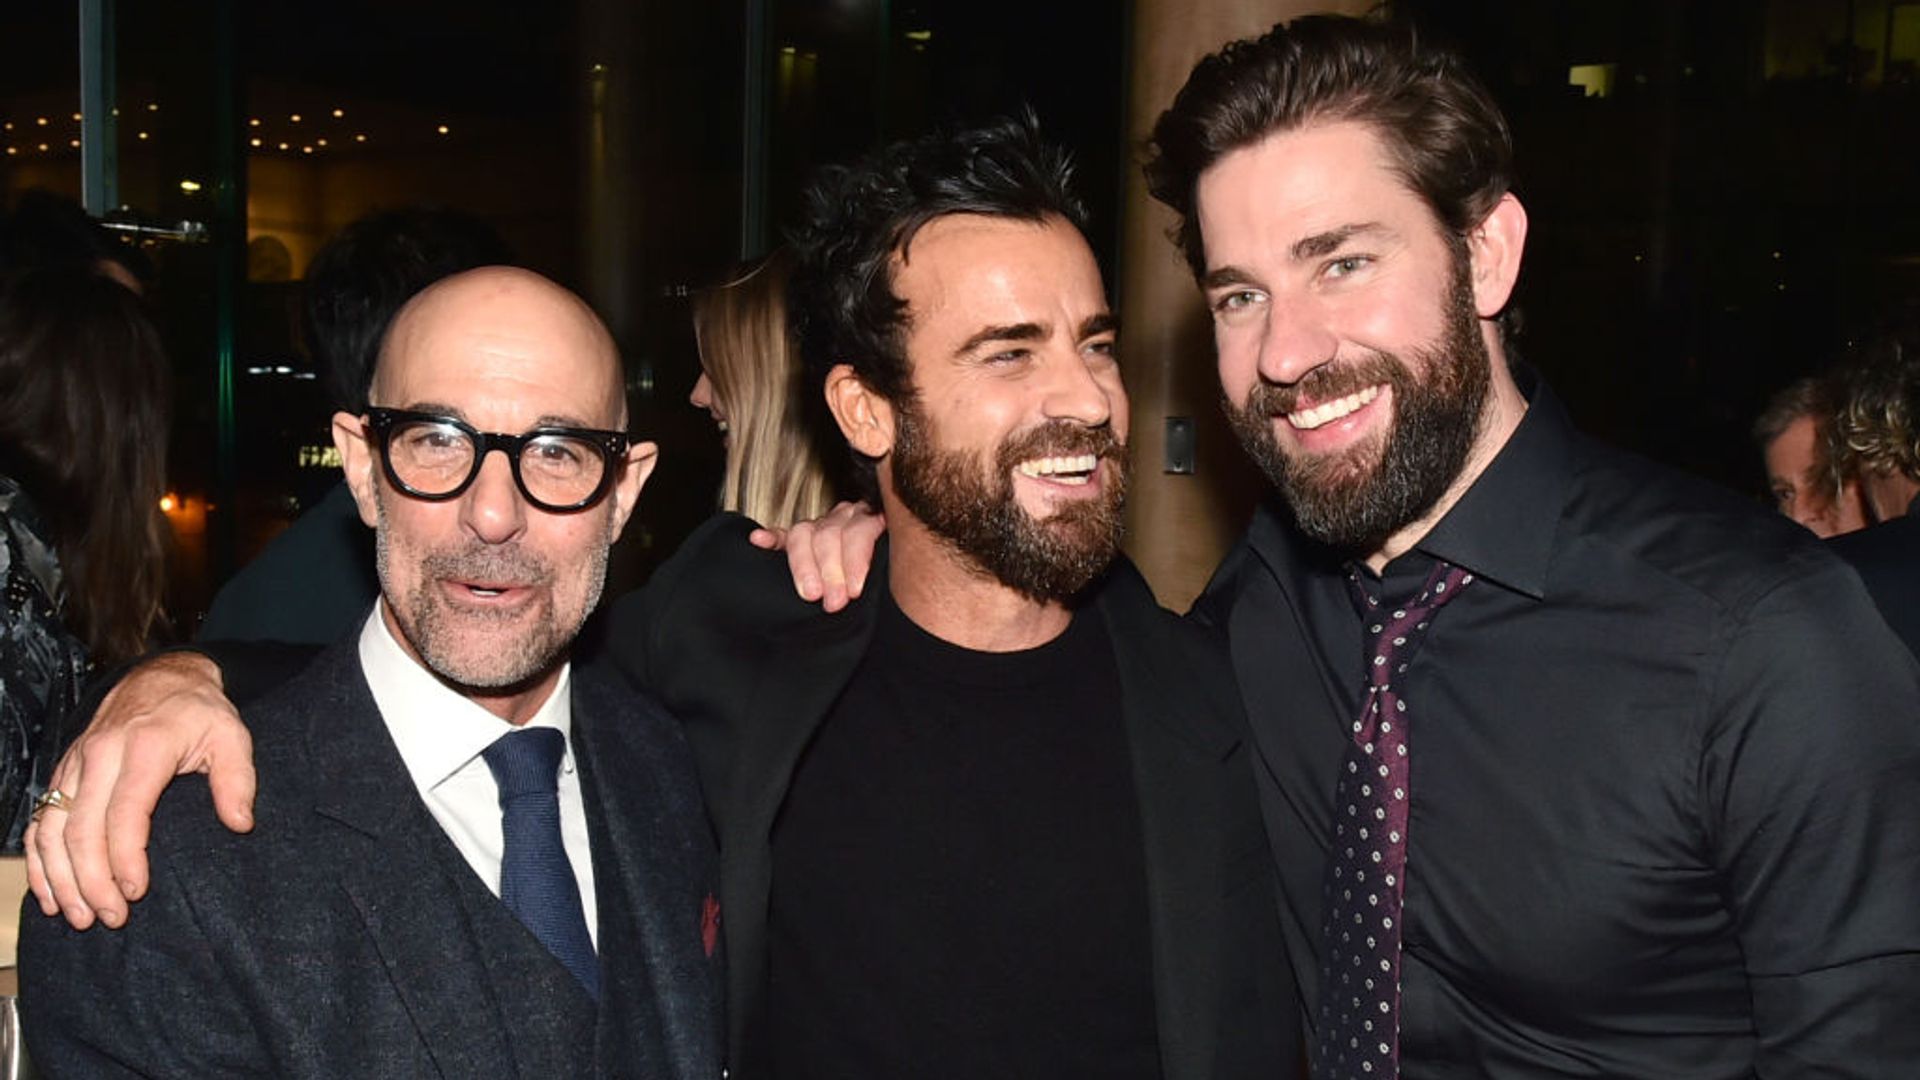 Stanley Tucci with his brother-in-law John Krasinski and actor Justin Theroux 